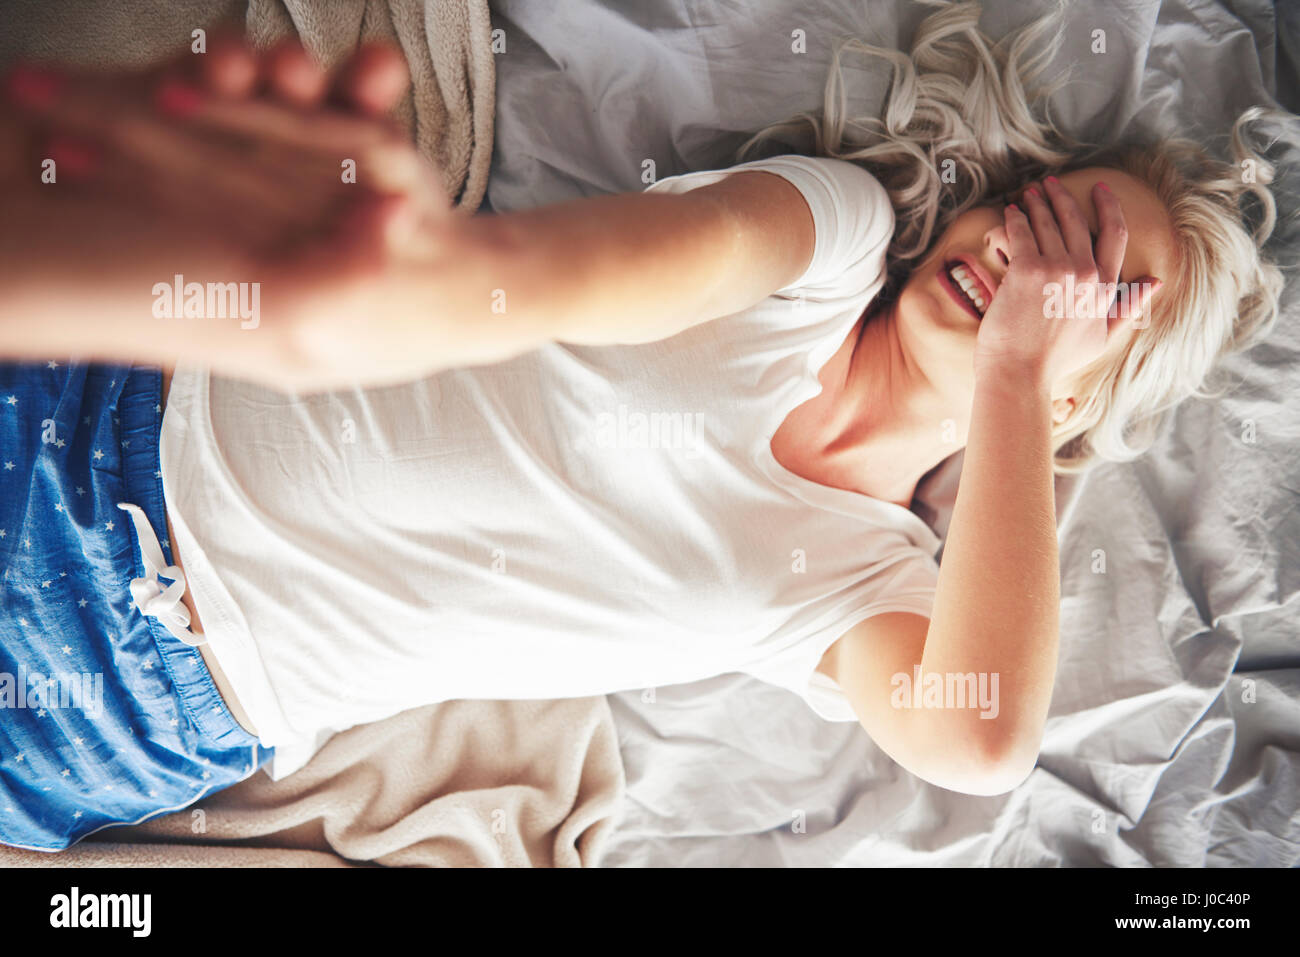 Woman lying on bed, man pulling her off bed, elevated view Stock Photo